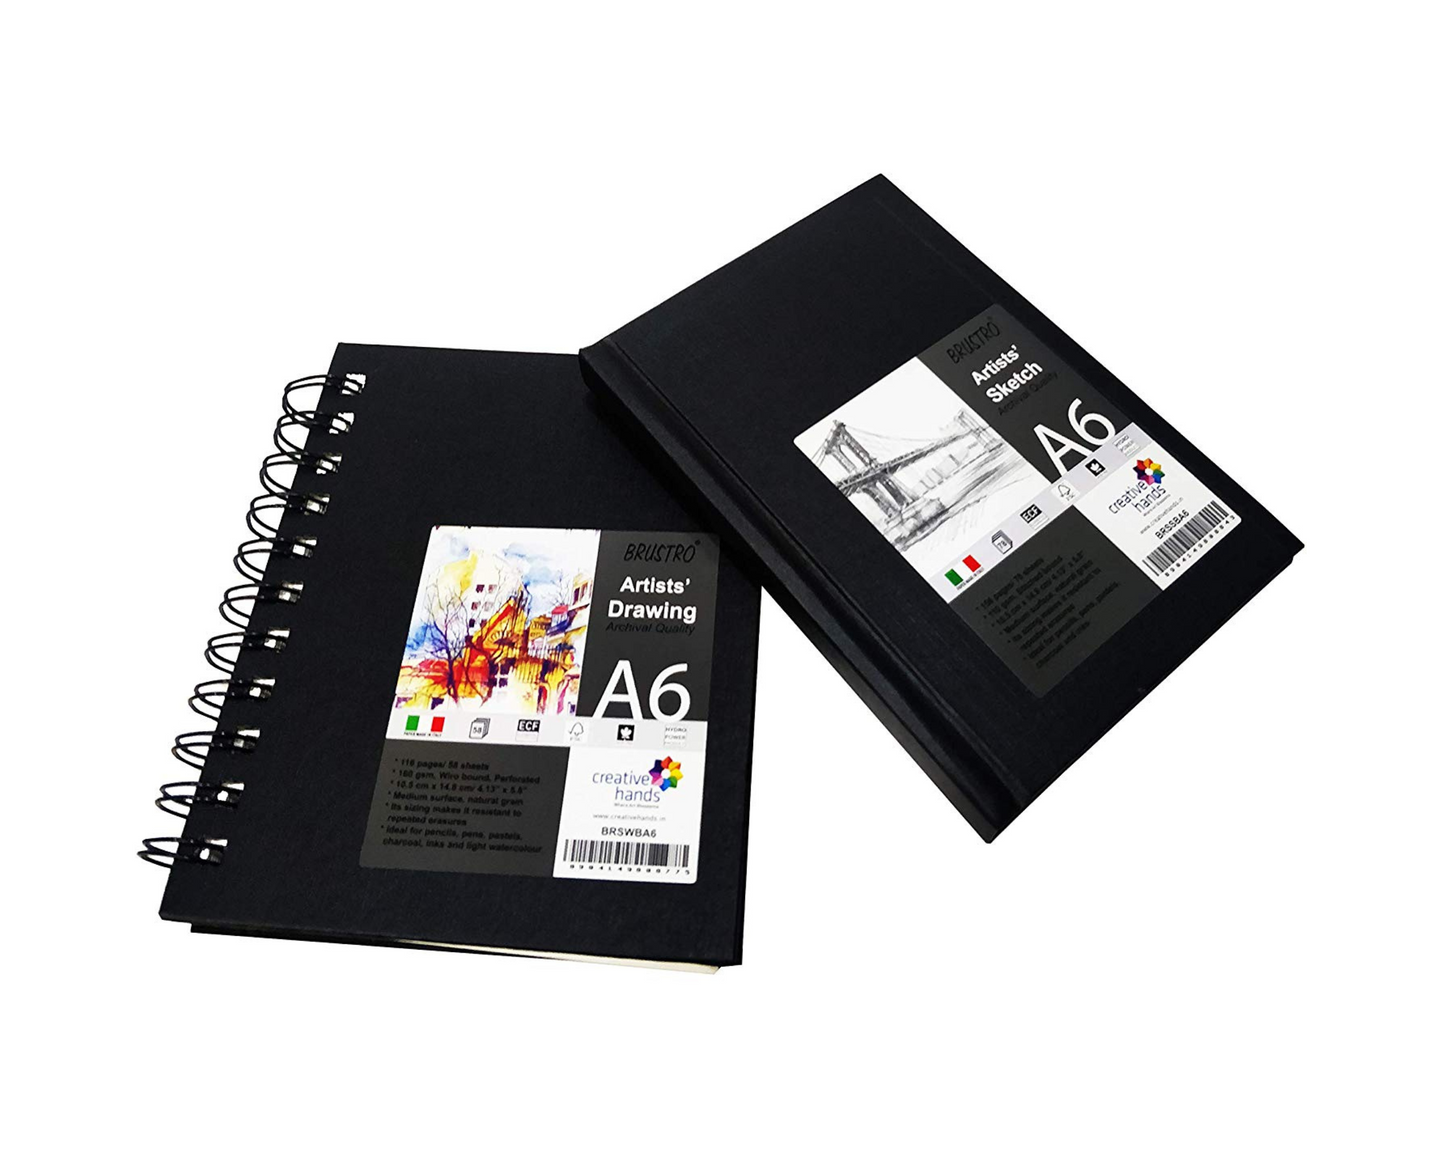 Brustro A6 Sketch Books Stitched & Wiro Bound Combo  110 GSM & 160 GSM  Acid Free/ Buy now ! – BrustroShop